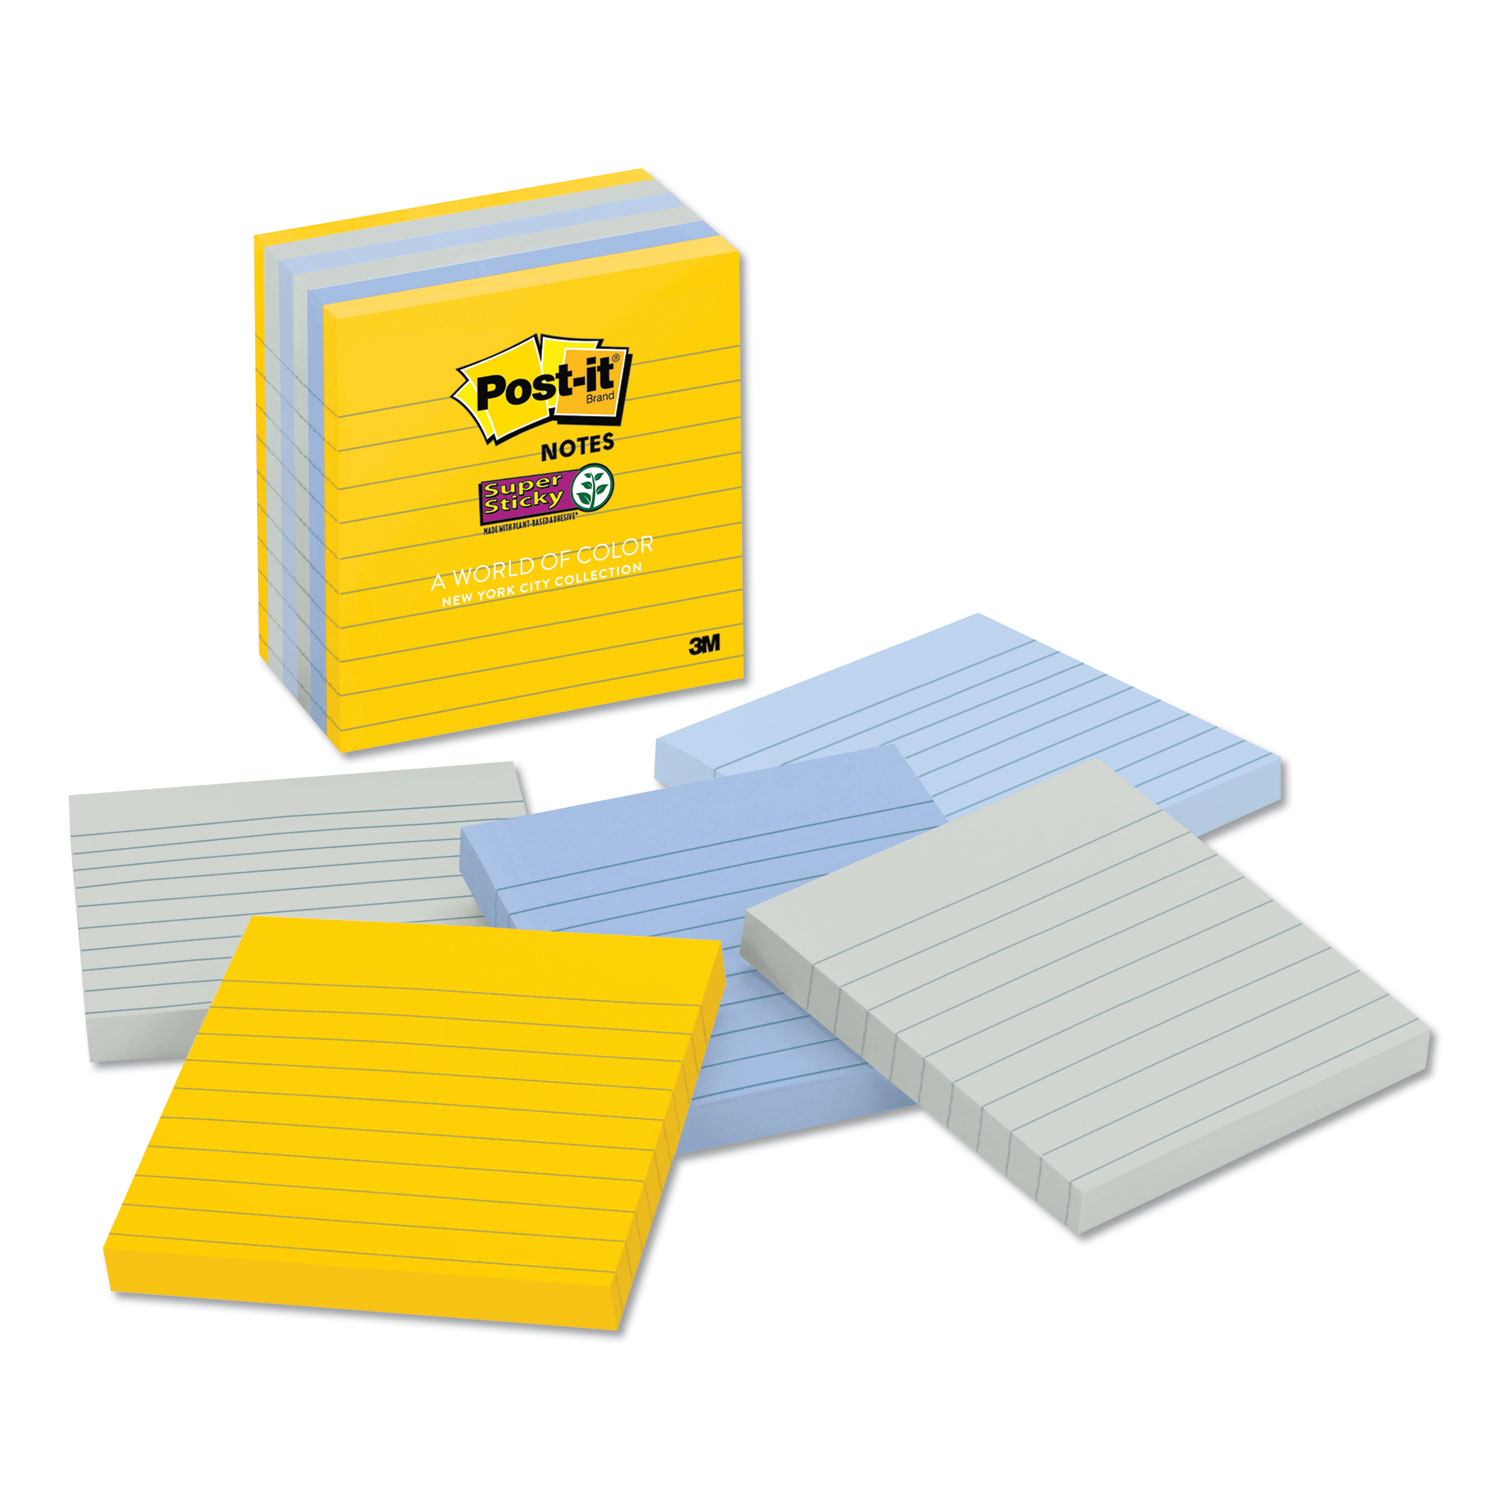  Post-it Notes Super Sticky 6756SSNY Pads in New York Colors Notes, 4 x 4, 90-Sheet, 6/Pack (MMM6756SSNY) 